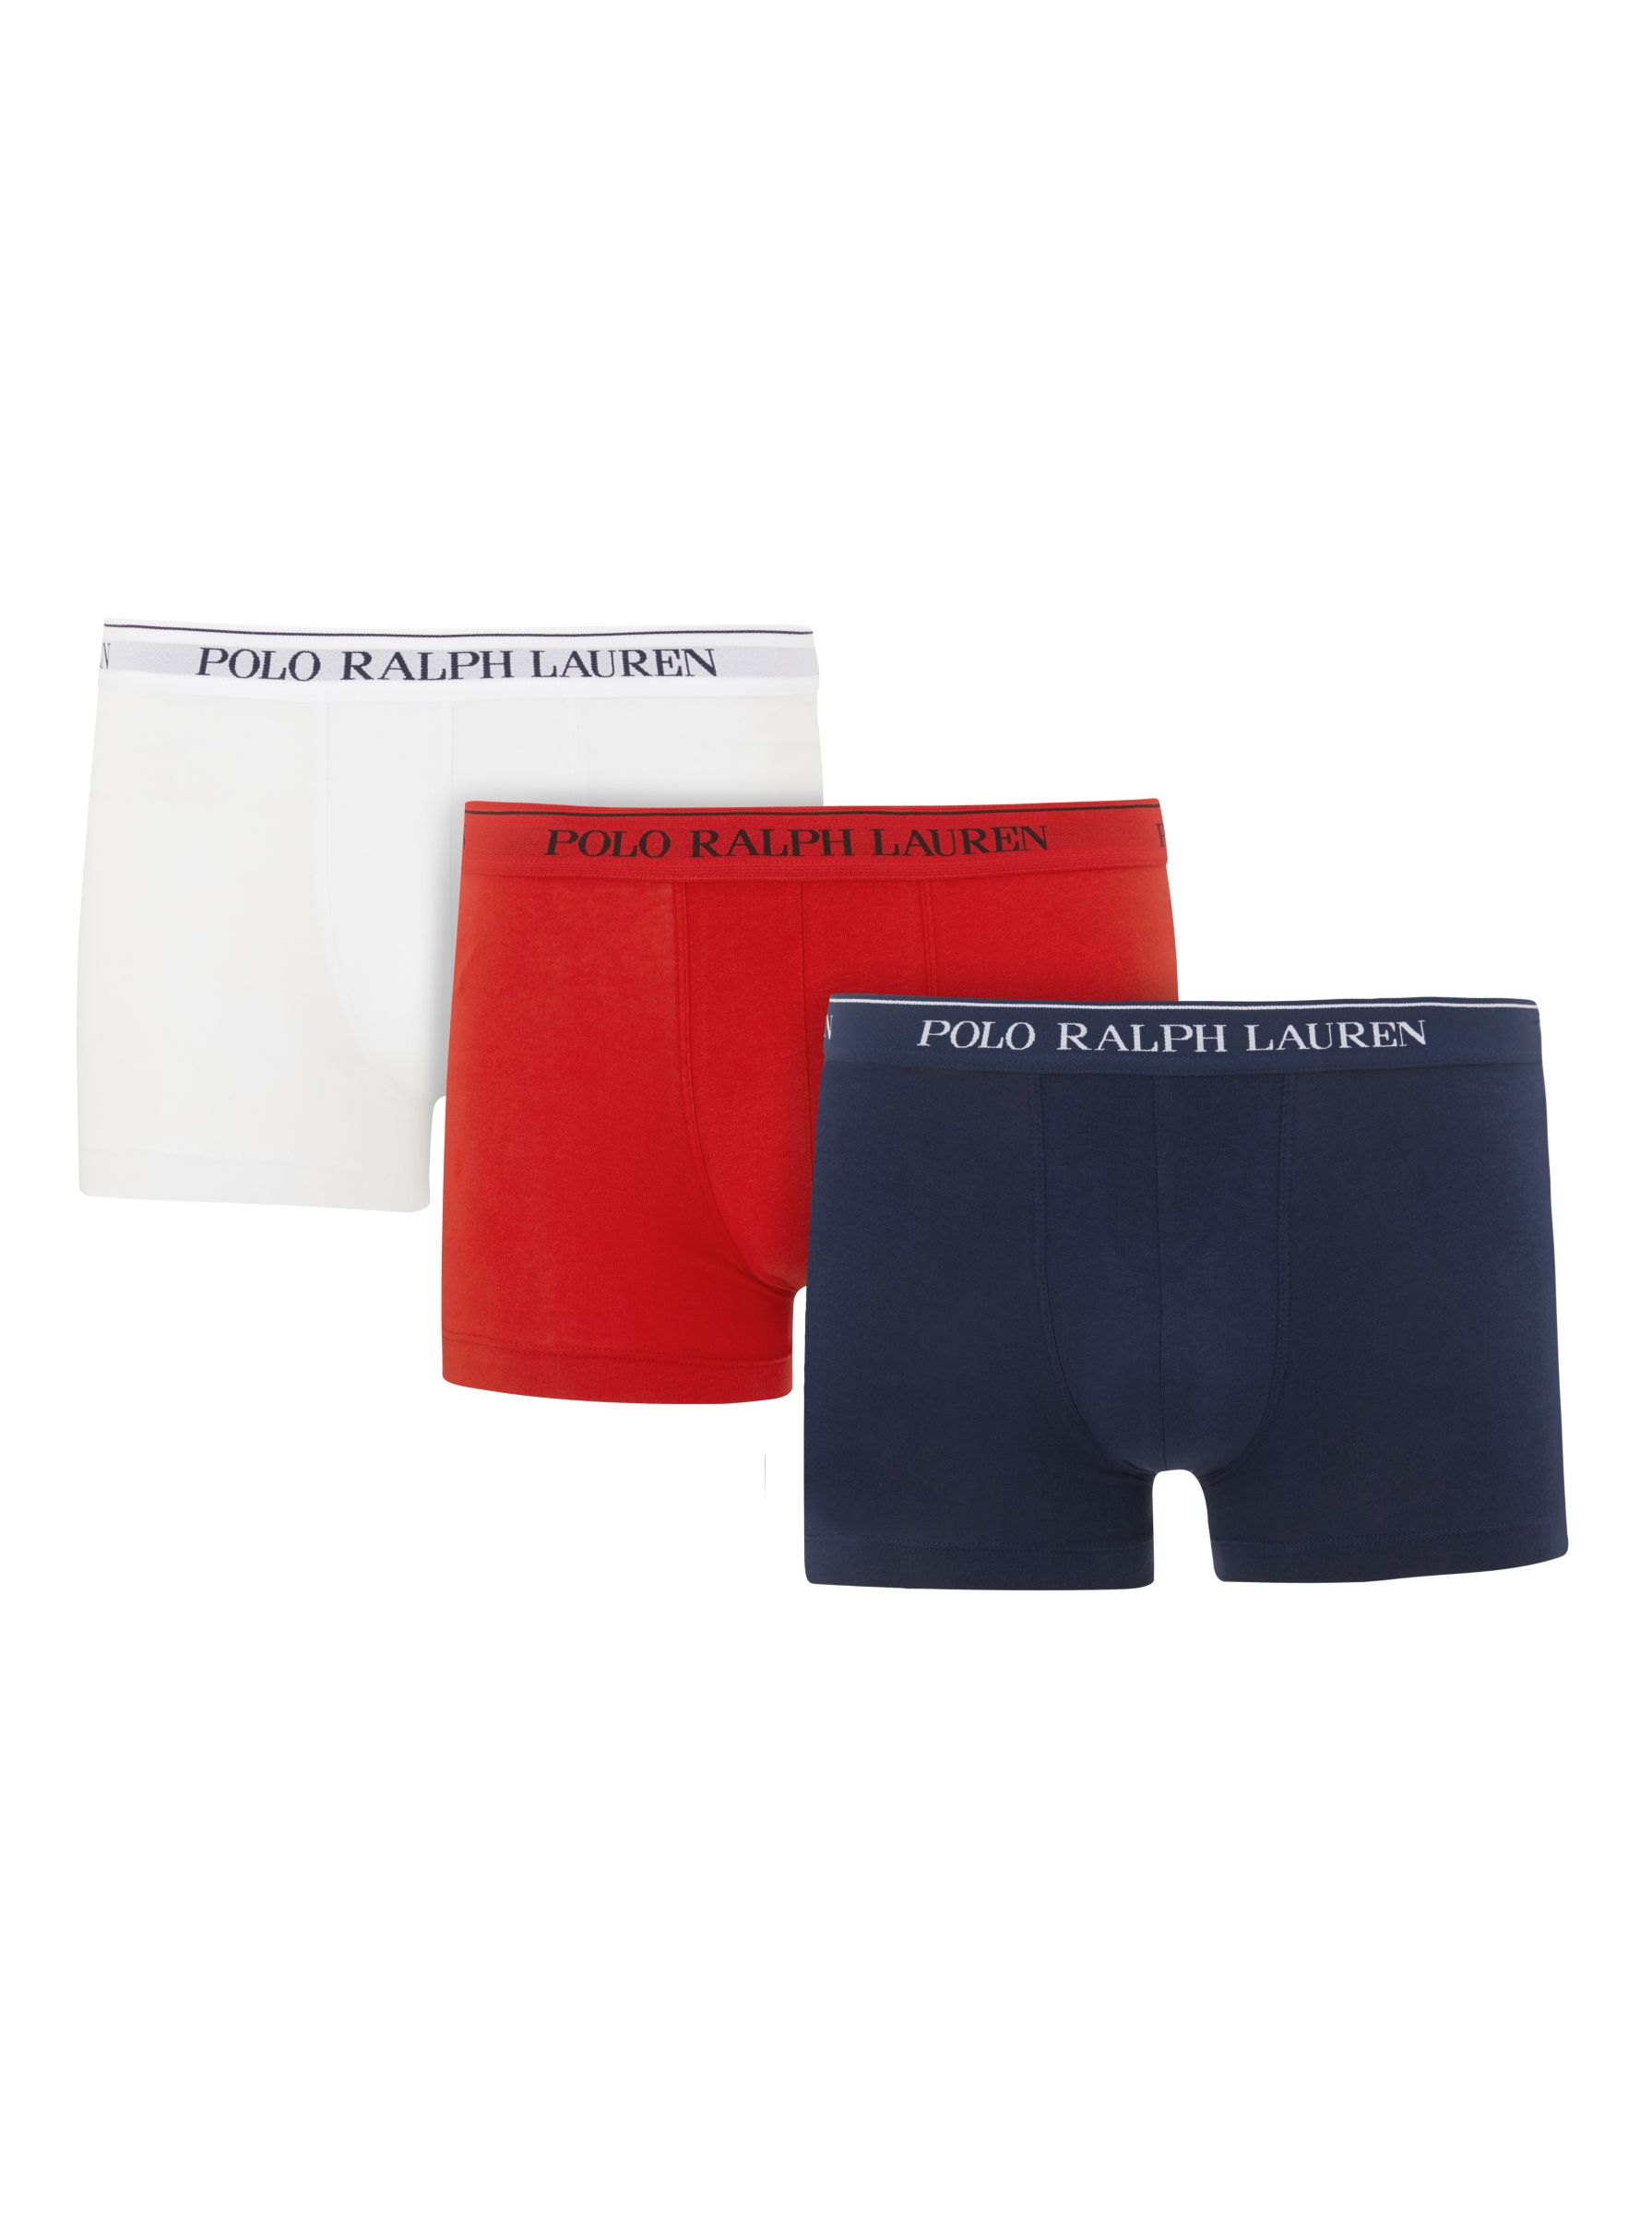 Polo Ralph Lauren Stretch Cotton Trunks, Pack of 3, Blue/Red/White at ...